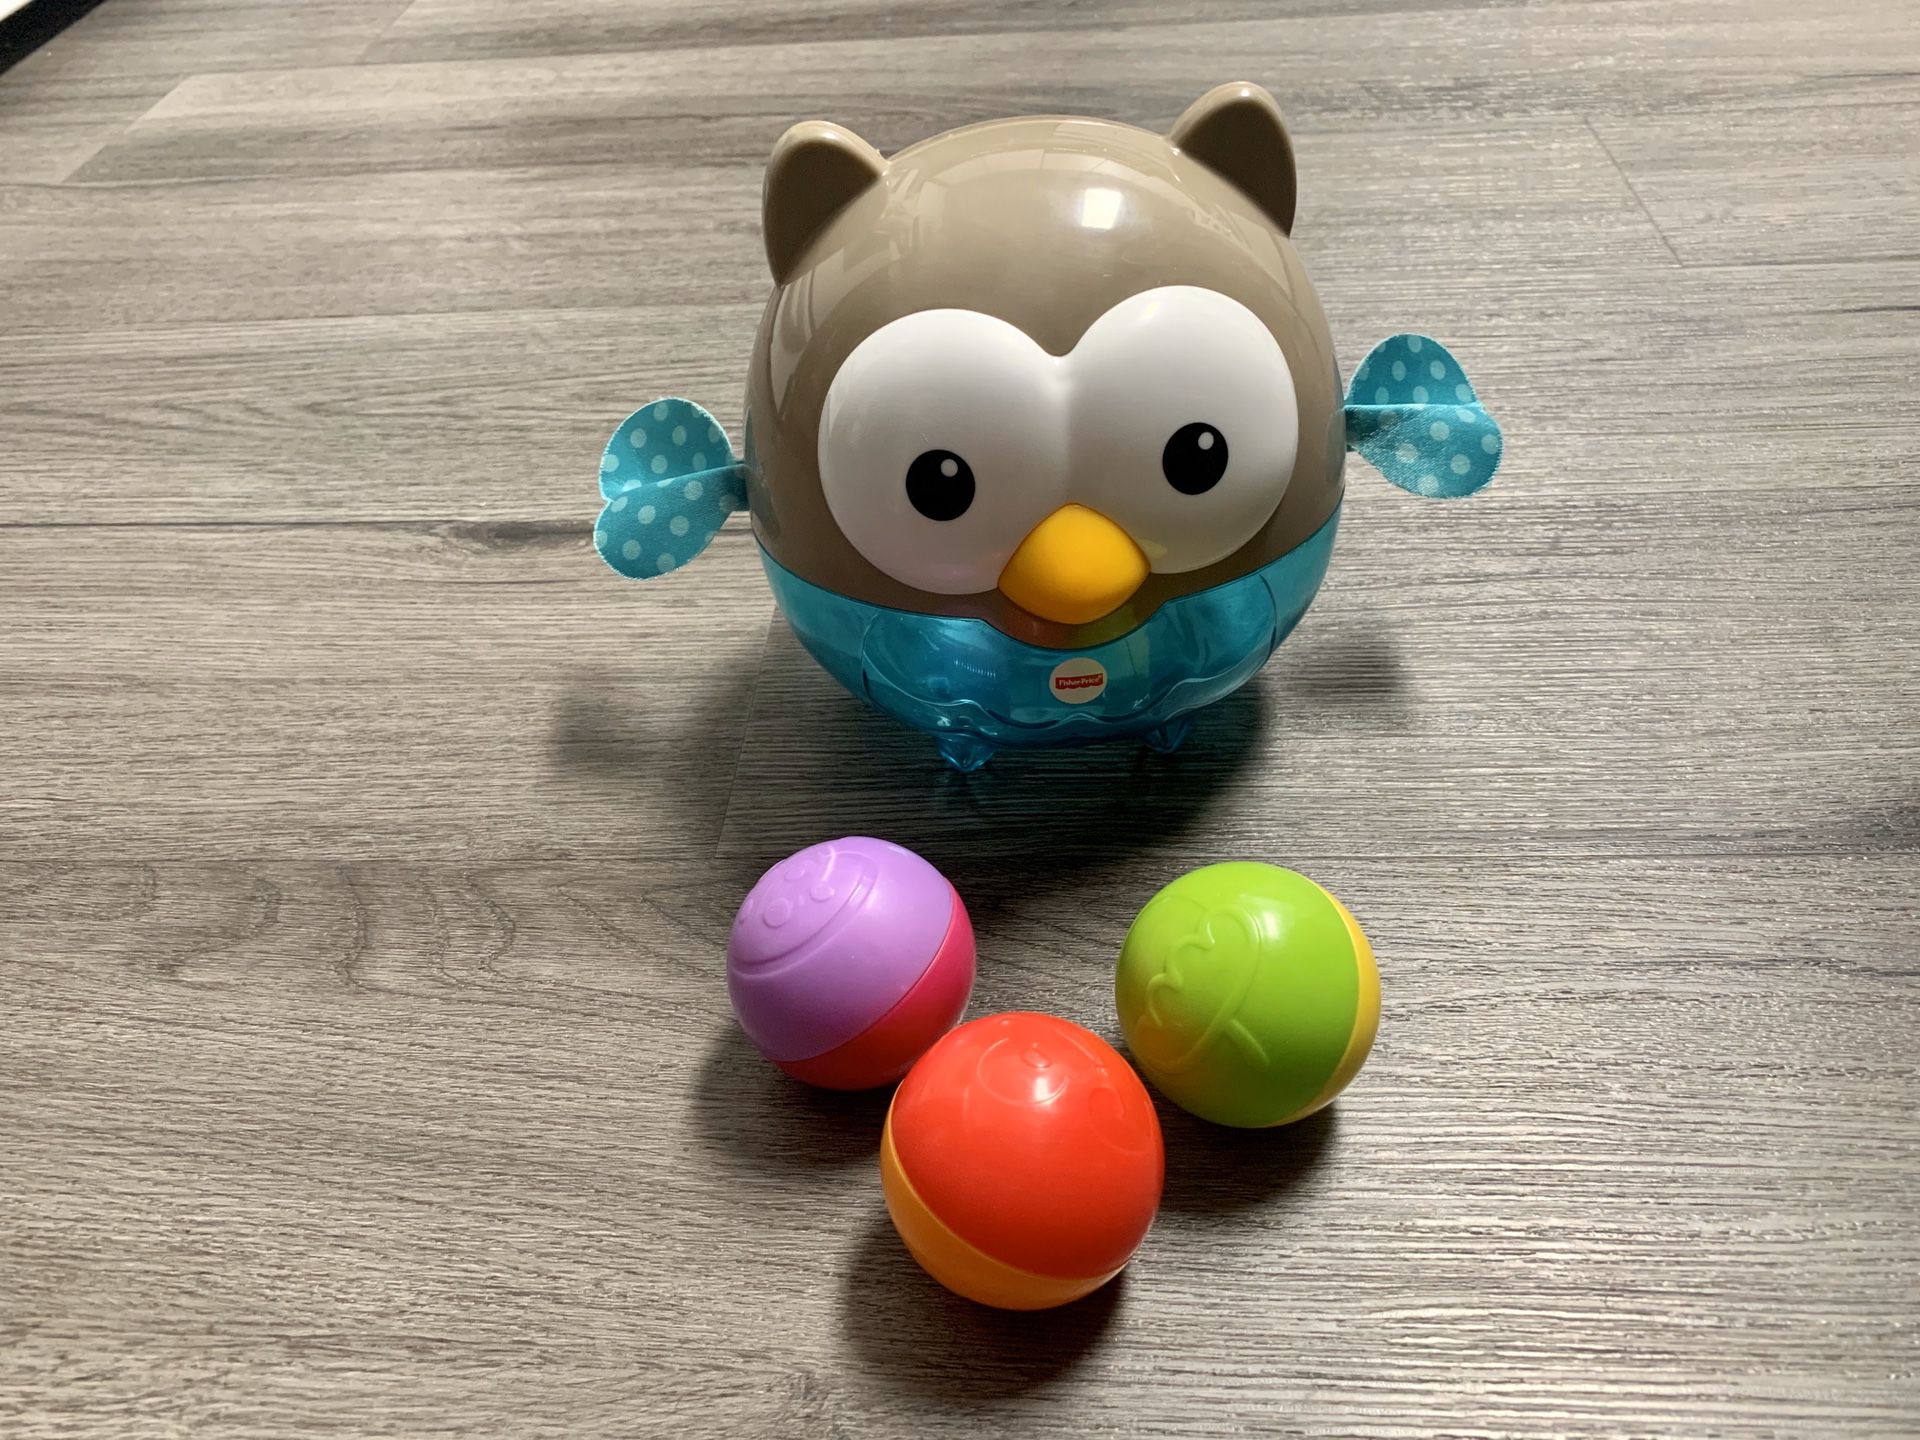 Fisher-Price 2-in-1 baby owl chime ball